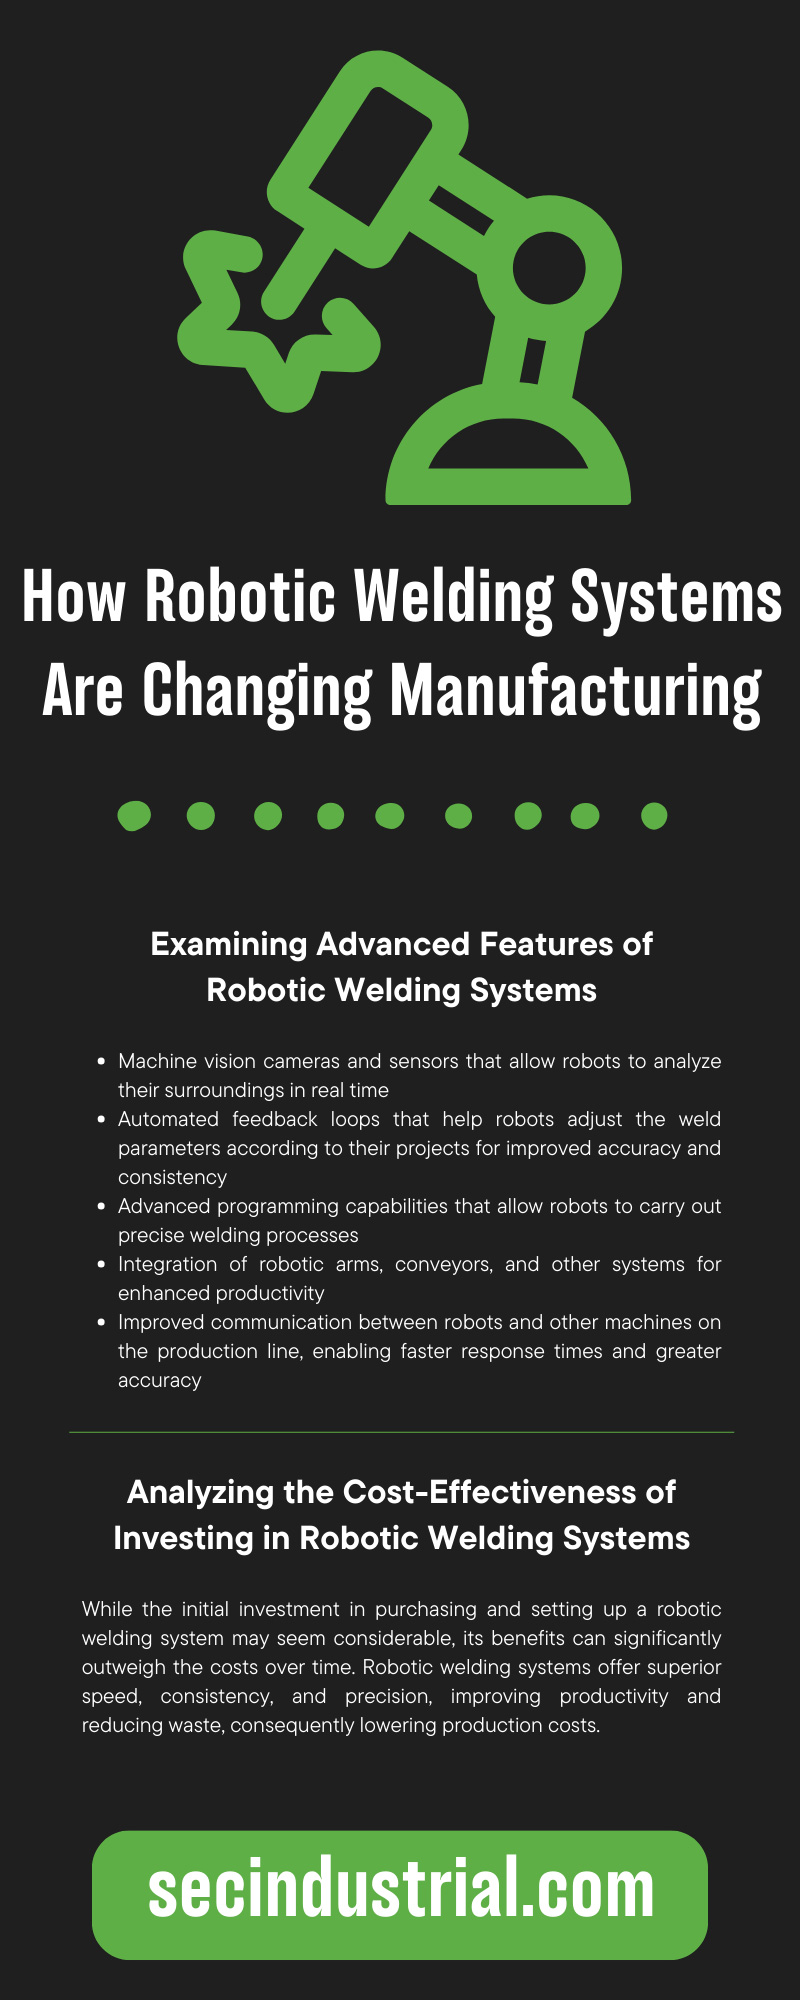 How Robotic Welding Systems Are Changing Manufacturing
